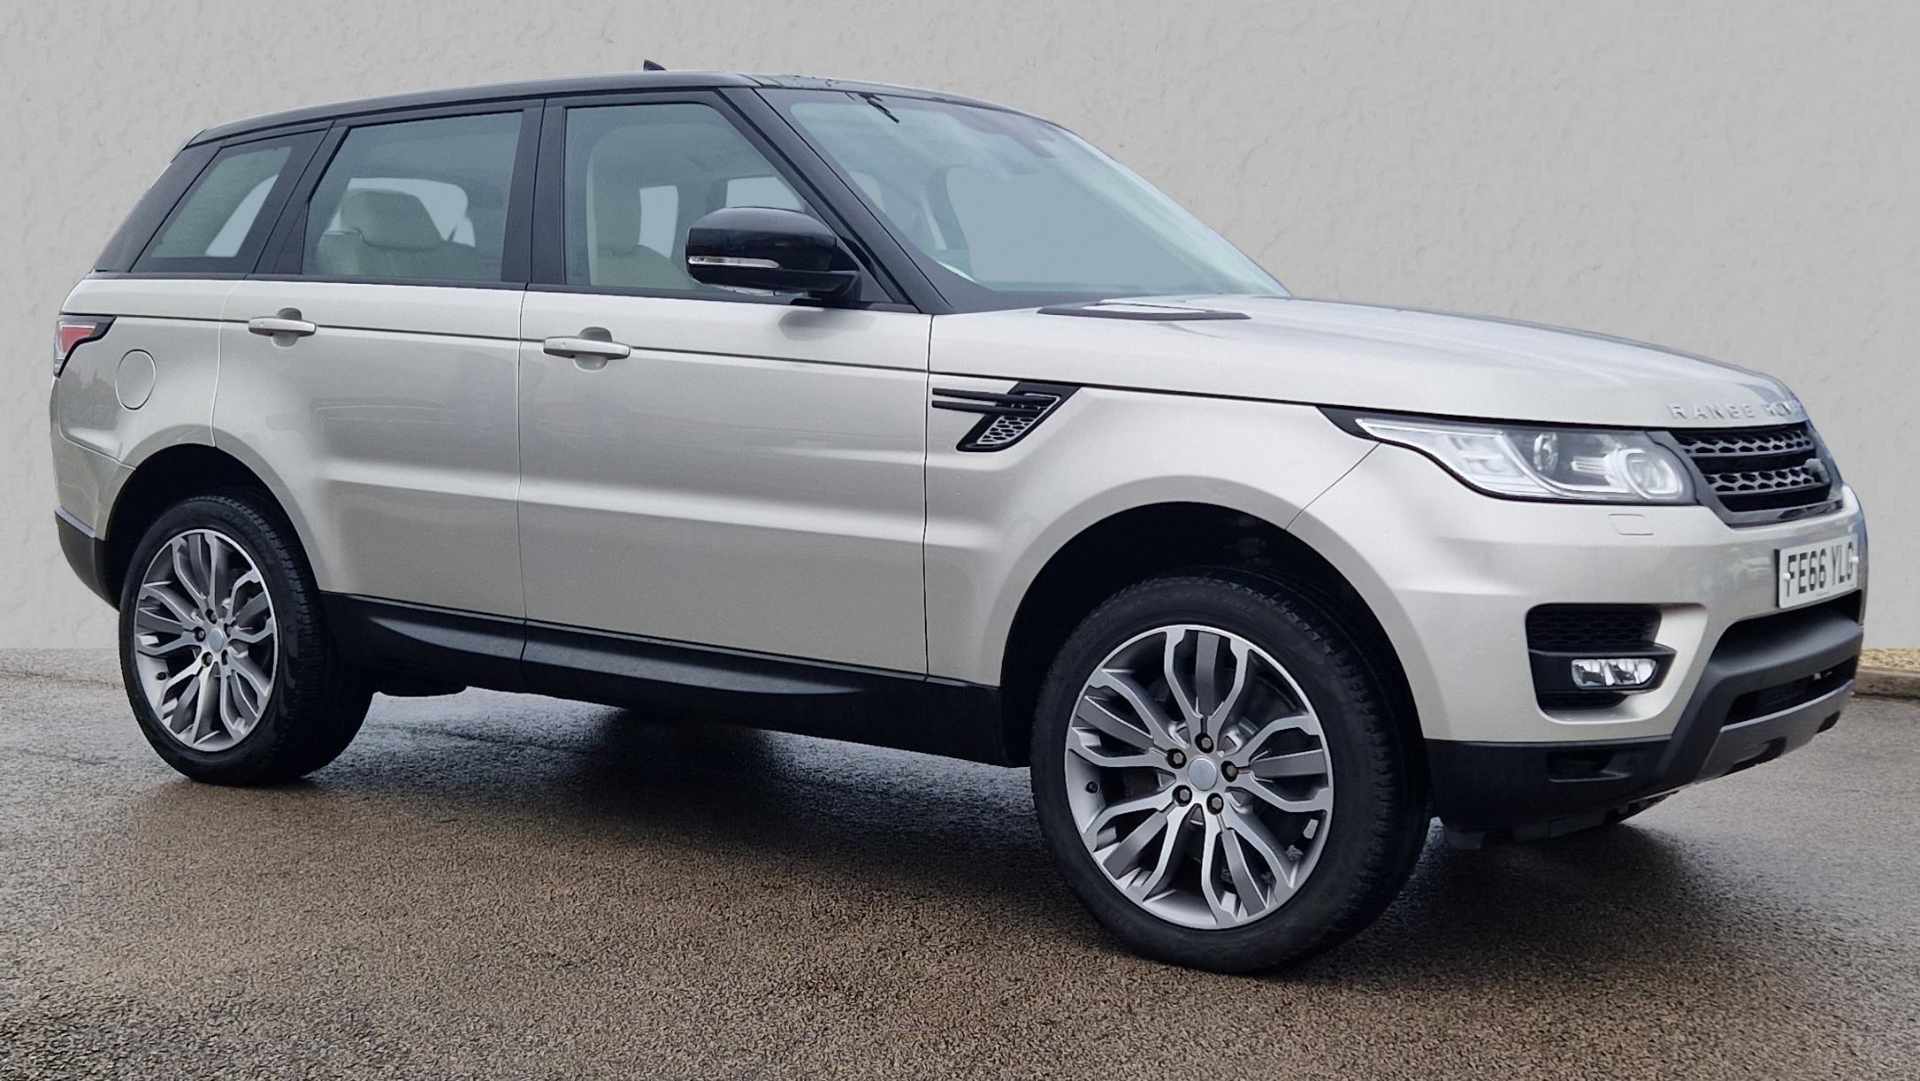 Do Range Rovers hold their value?